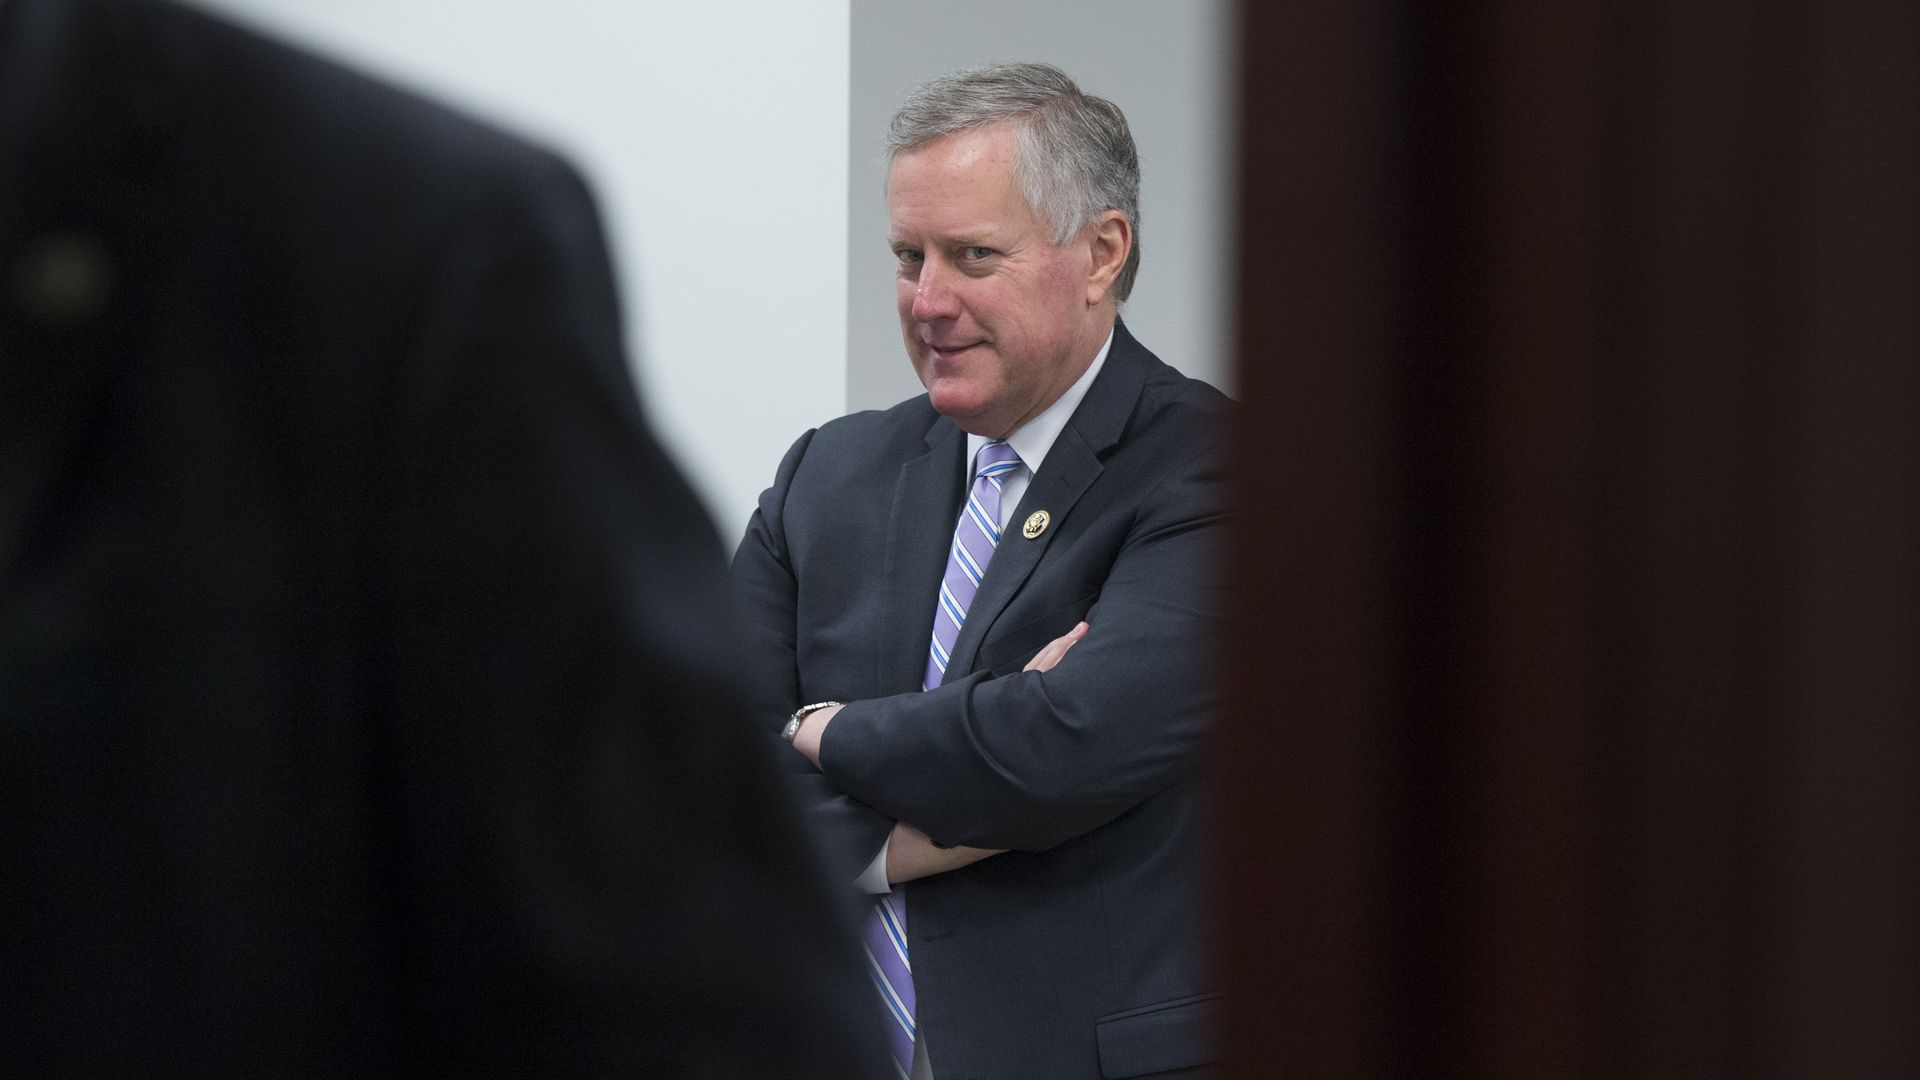 Rep. Mark Meadows stand in a dark suit with his arms crossed with two dark figures on either side in the foreground